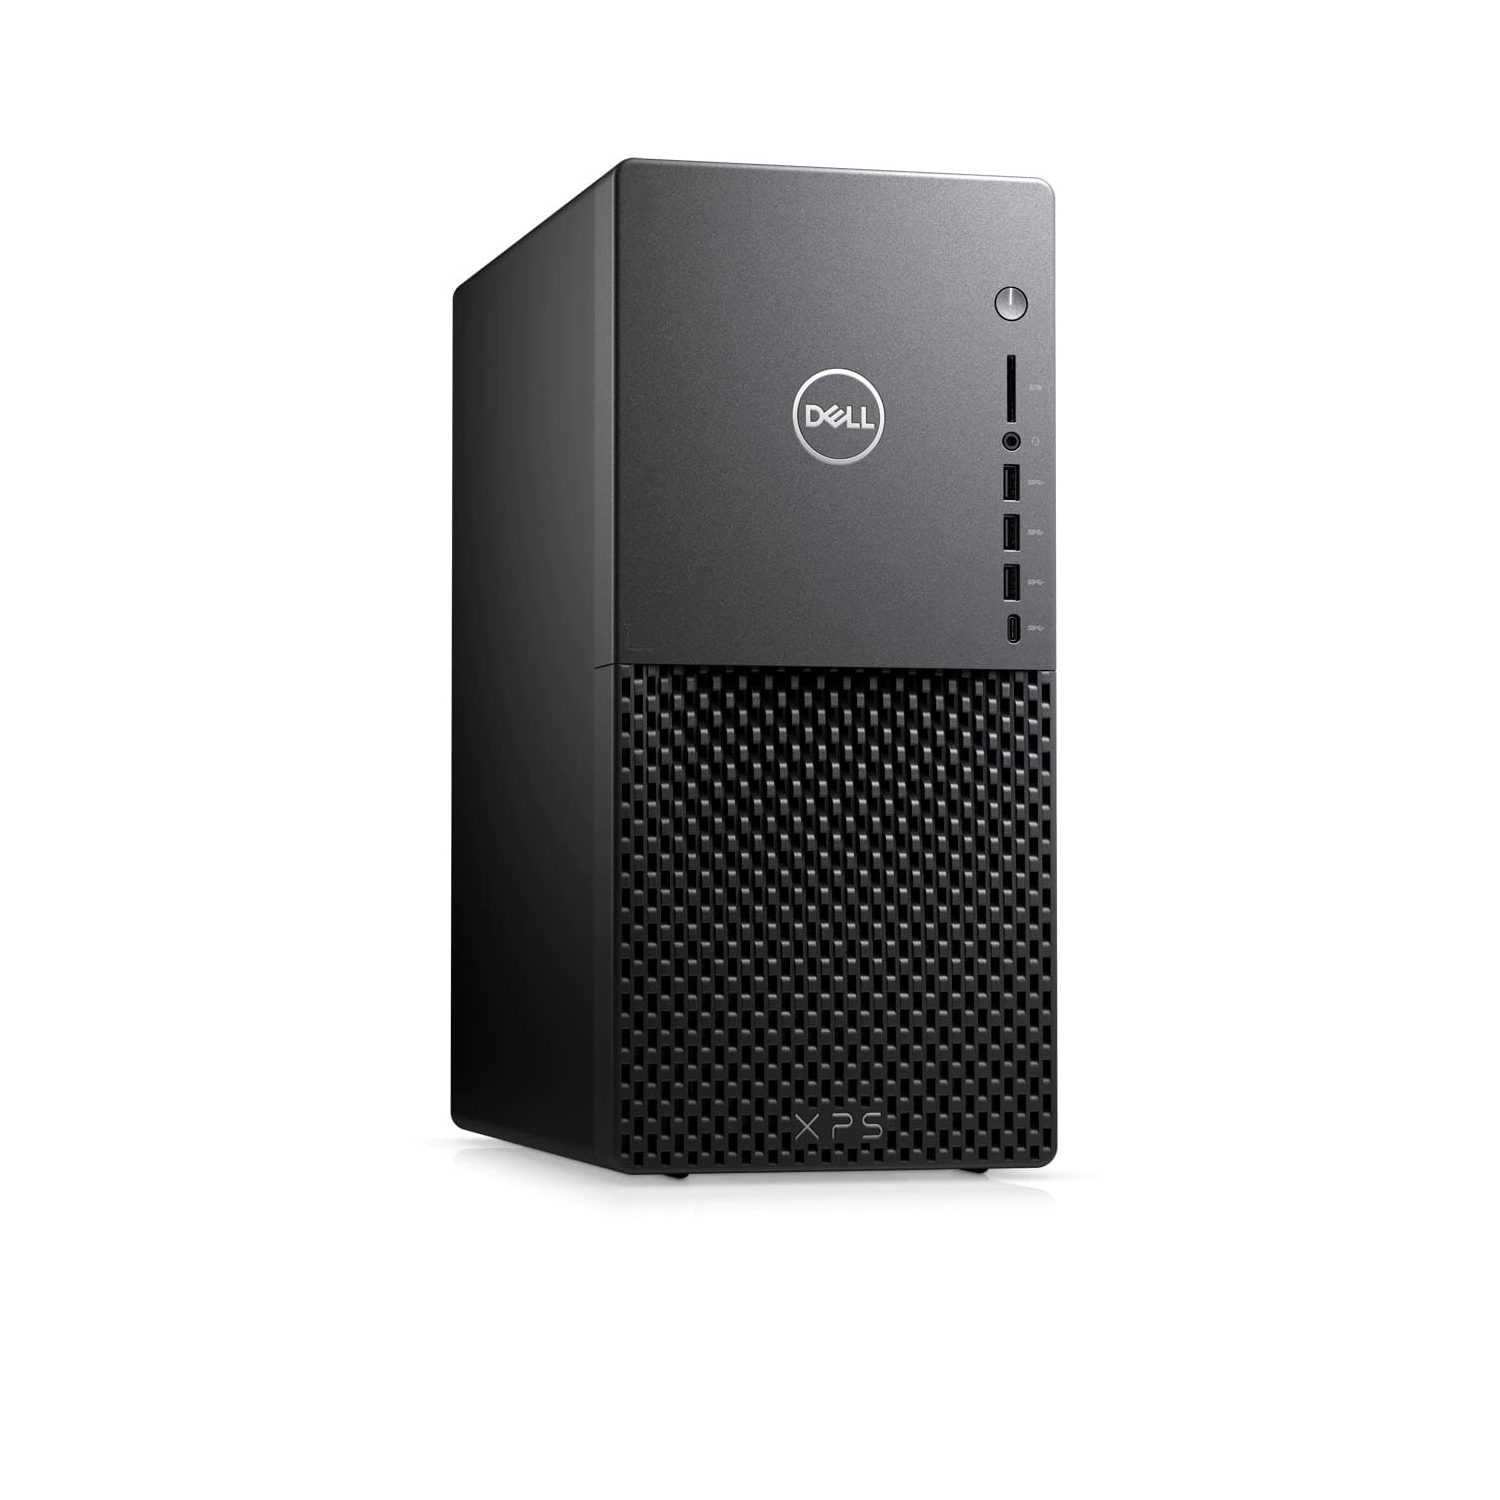 Refurbished (Excellent) - Dell XPS 8940 Desktop (2020) | Core i5 - 1TB SSD - 8GB RAM | 6 Cores @ 4.4 GHz - 11th Gen CPU Certified Refurbished